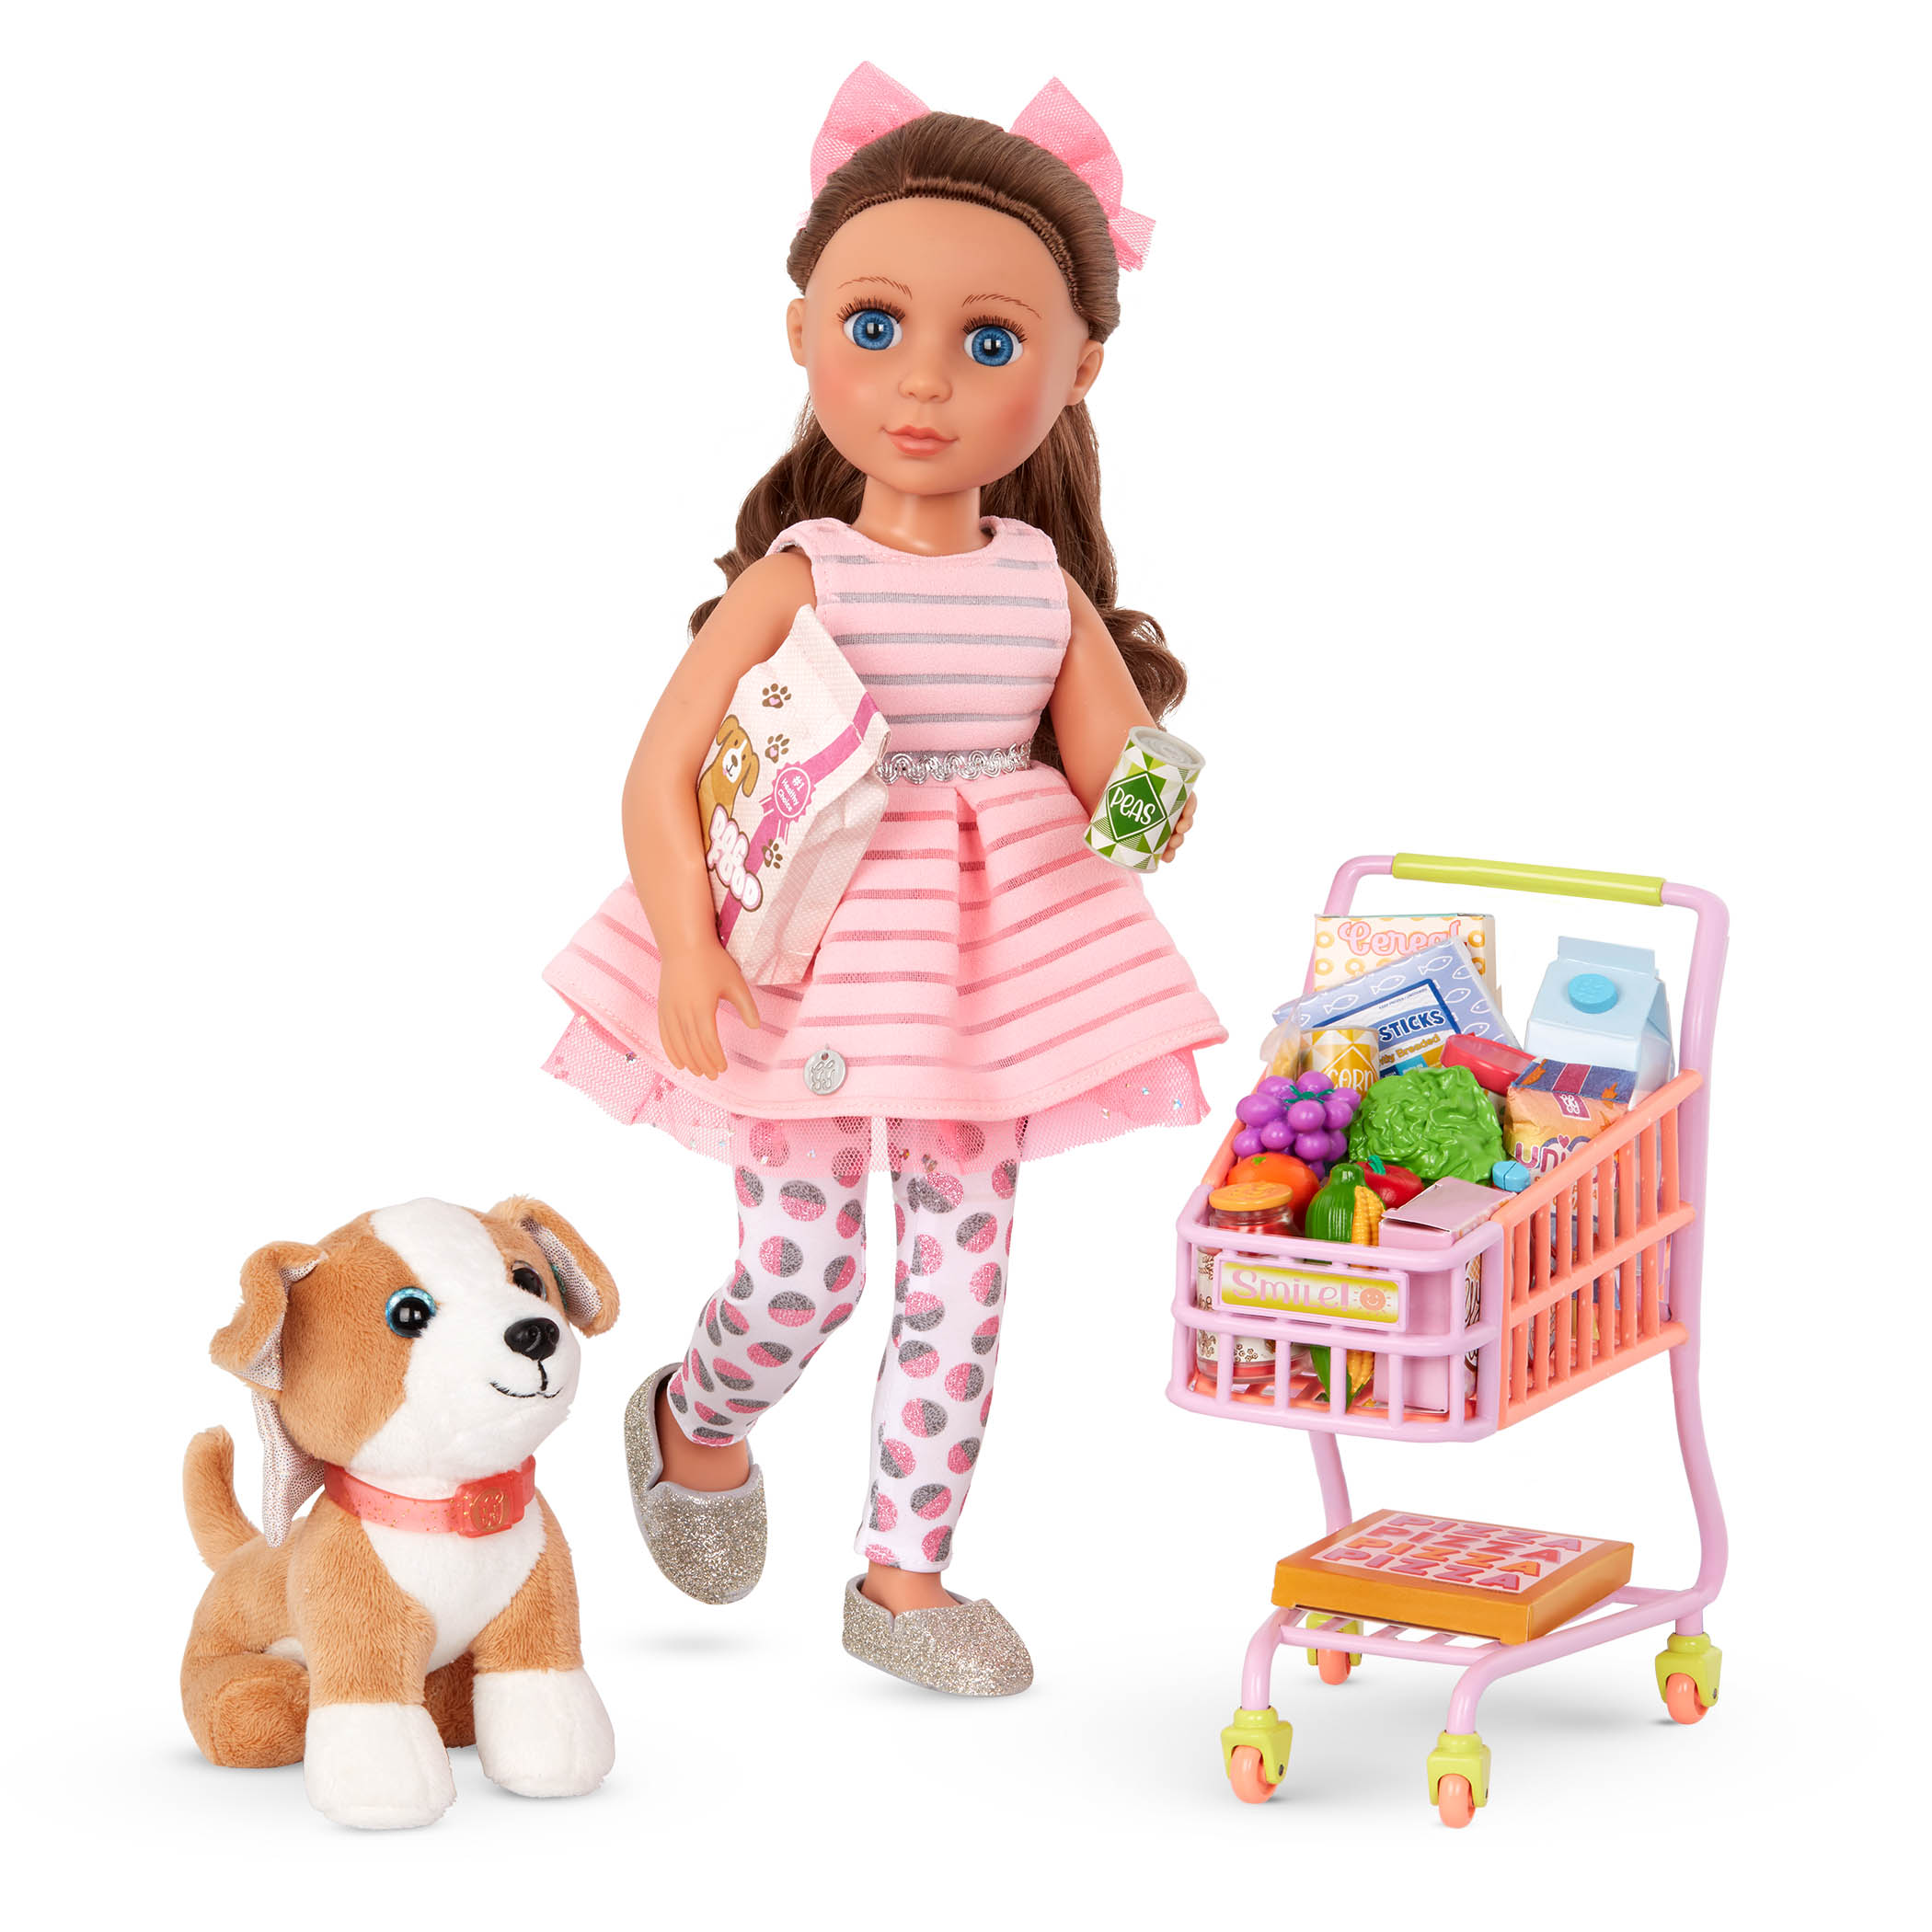 Glitter Girls Ice Cream Shop Accessory Playset For 14 Dolls : Target